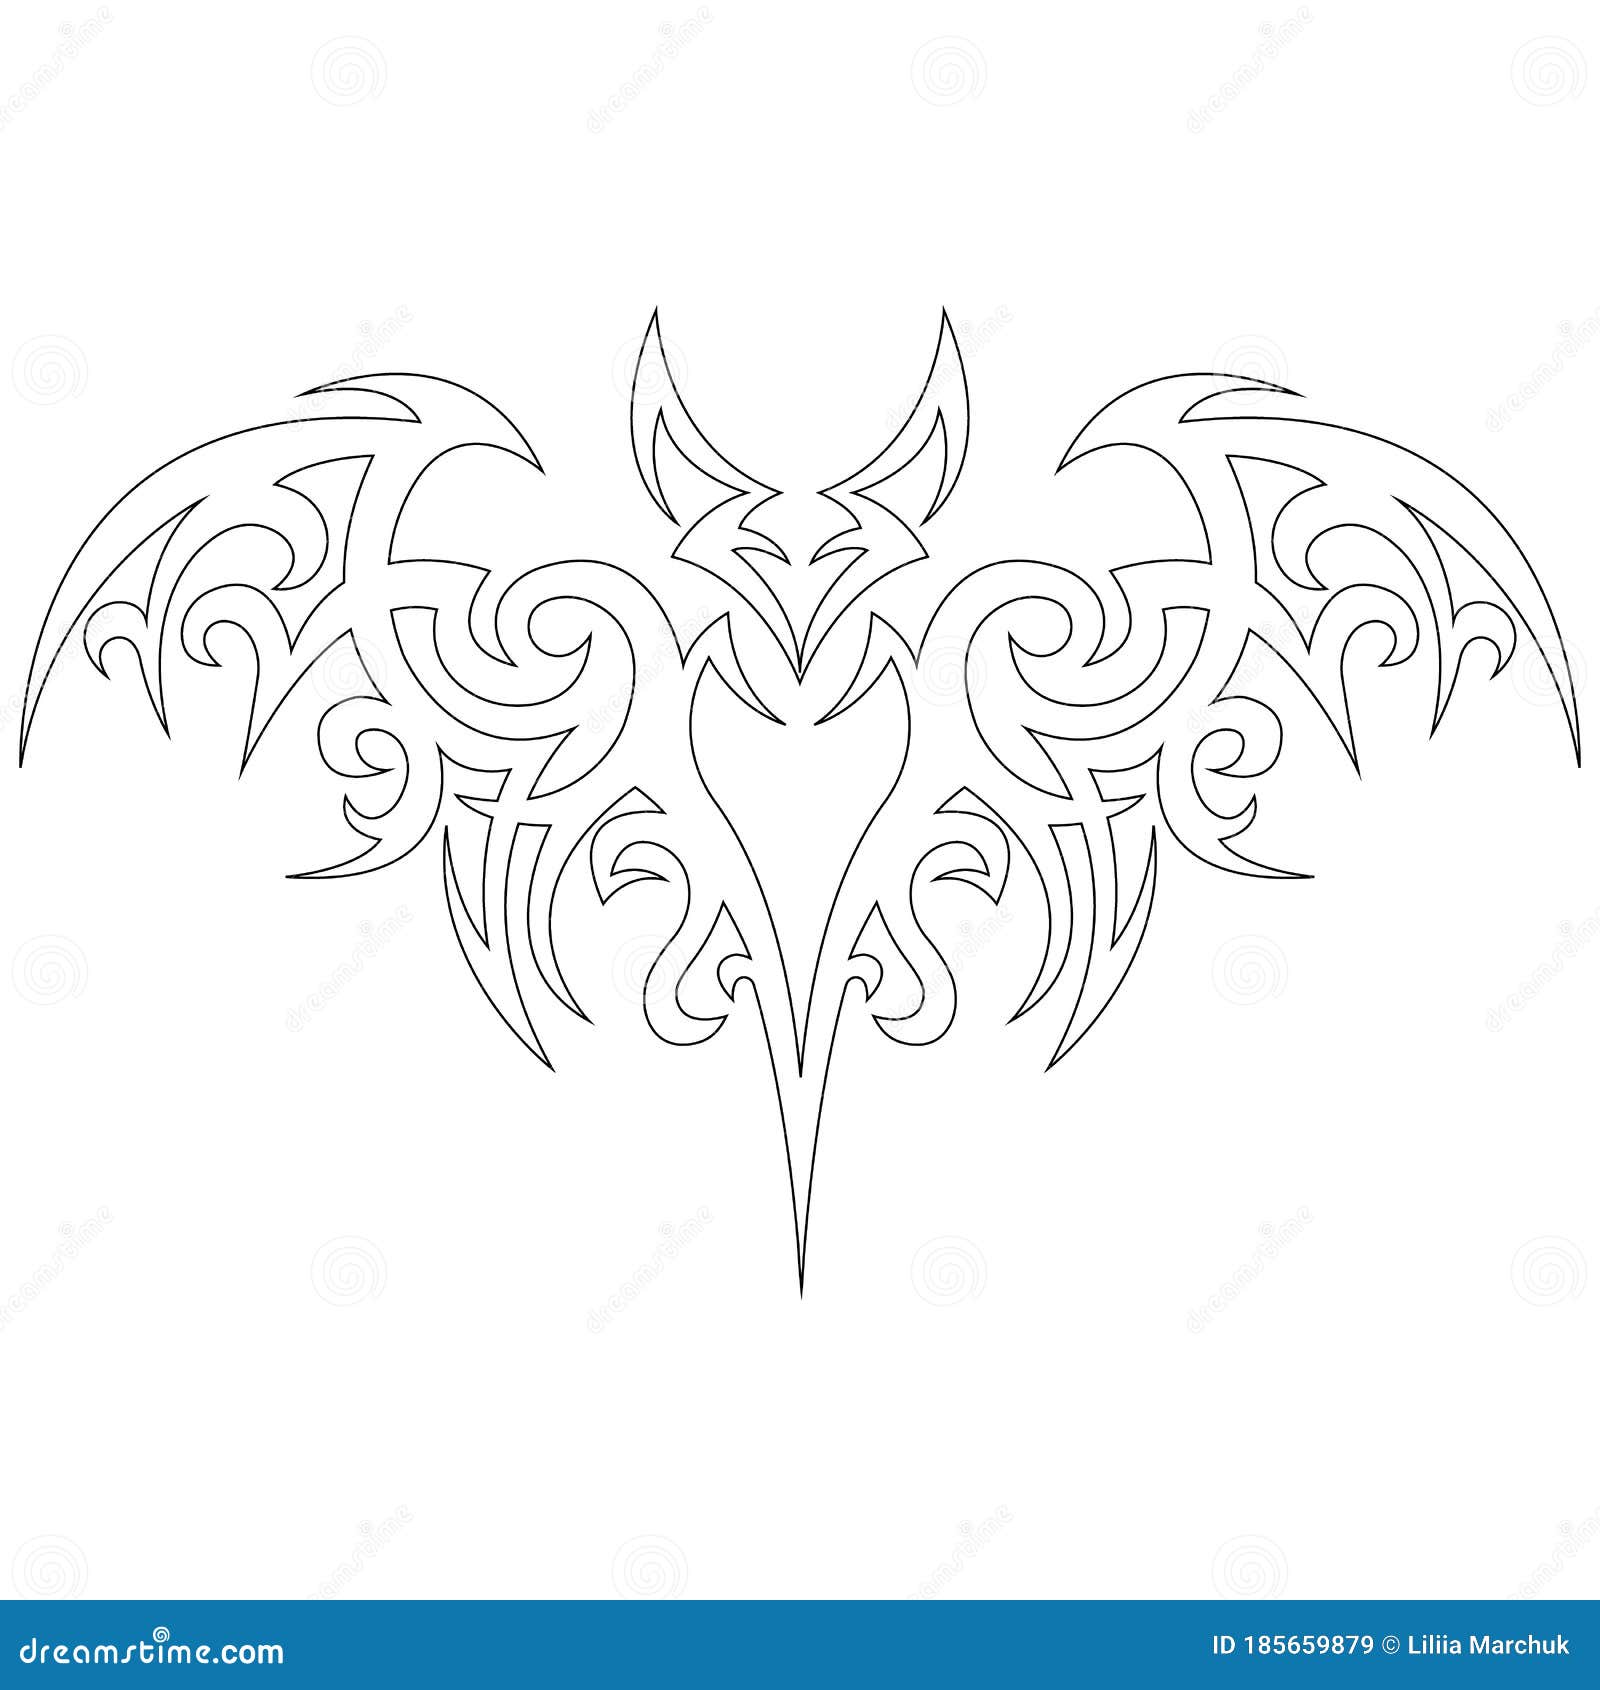 Download Bat Drawn With Contour Lines Coloring Design Can Be Used For Coloring Book Editorial Stock Image Illustration Of Halloween Background 185659879